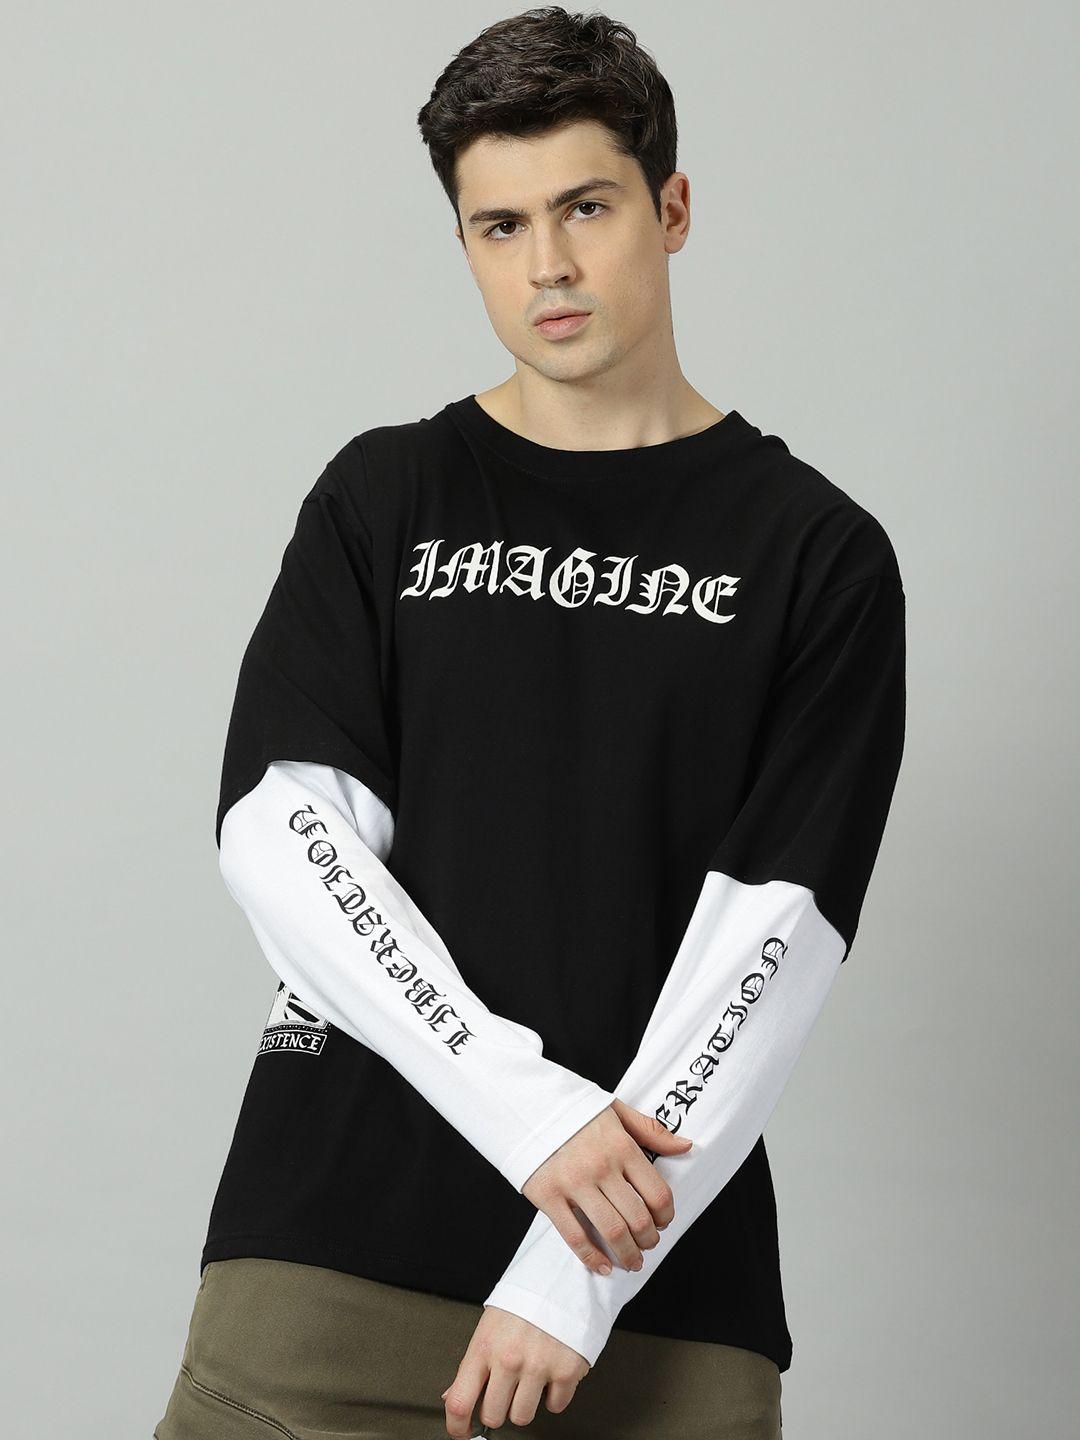 the hollander typography printed cotton t-shirt